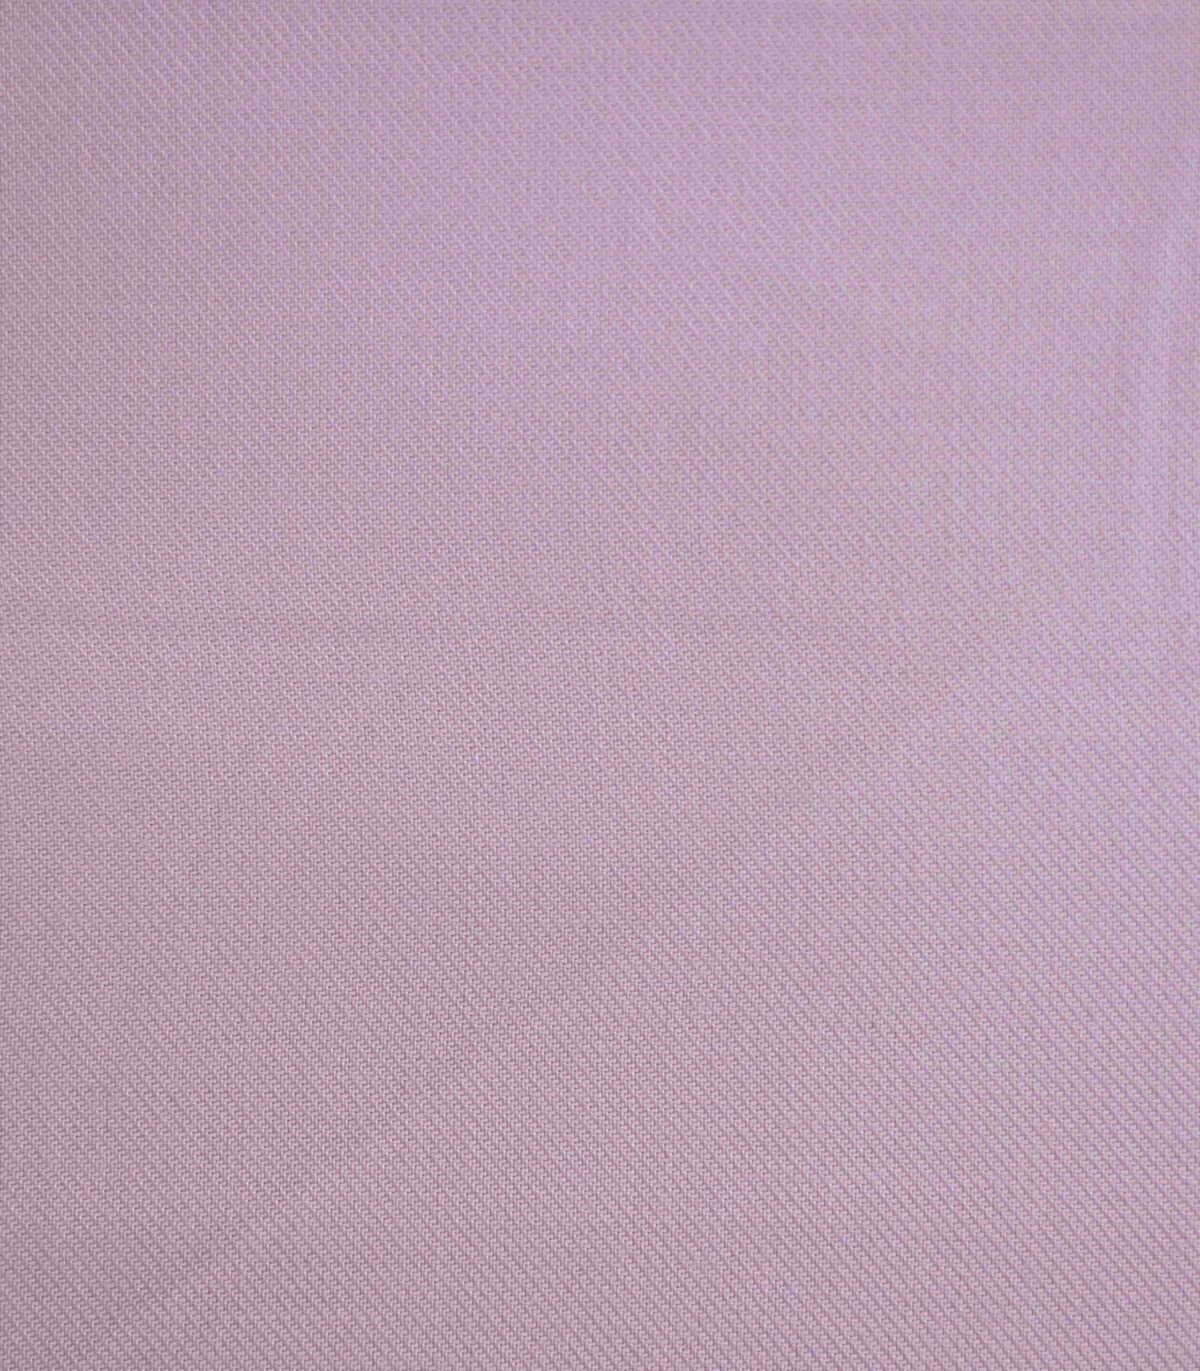 Rayon Twill Light Pink Solid Fabric